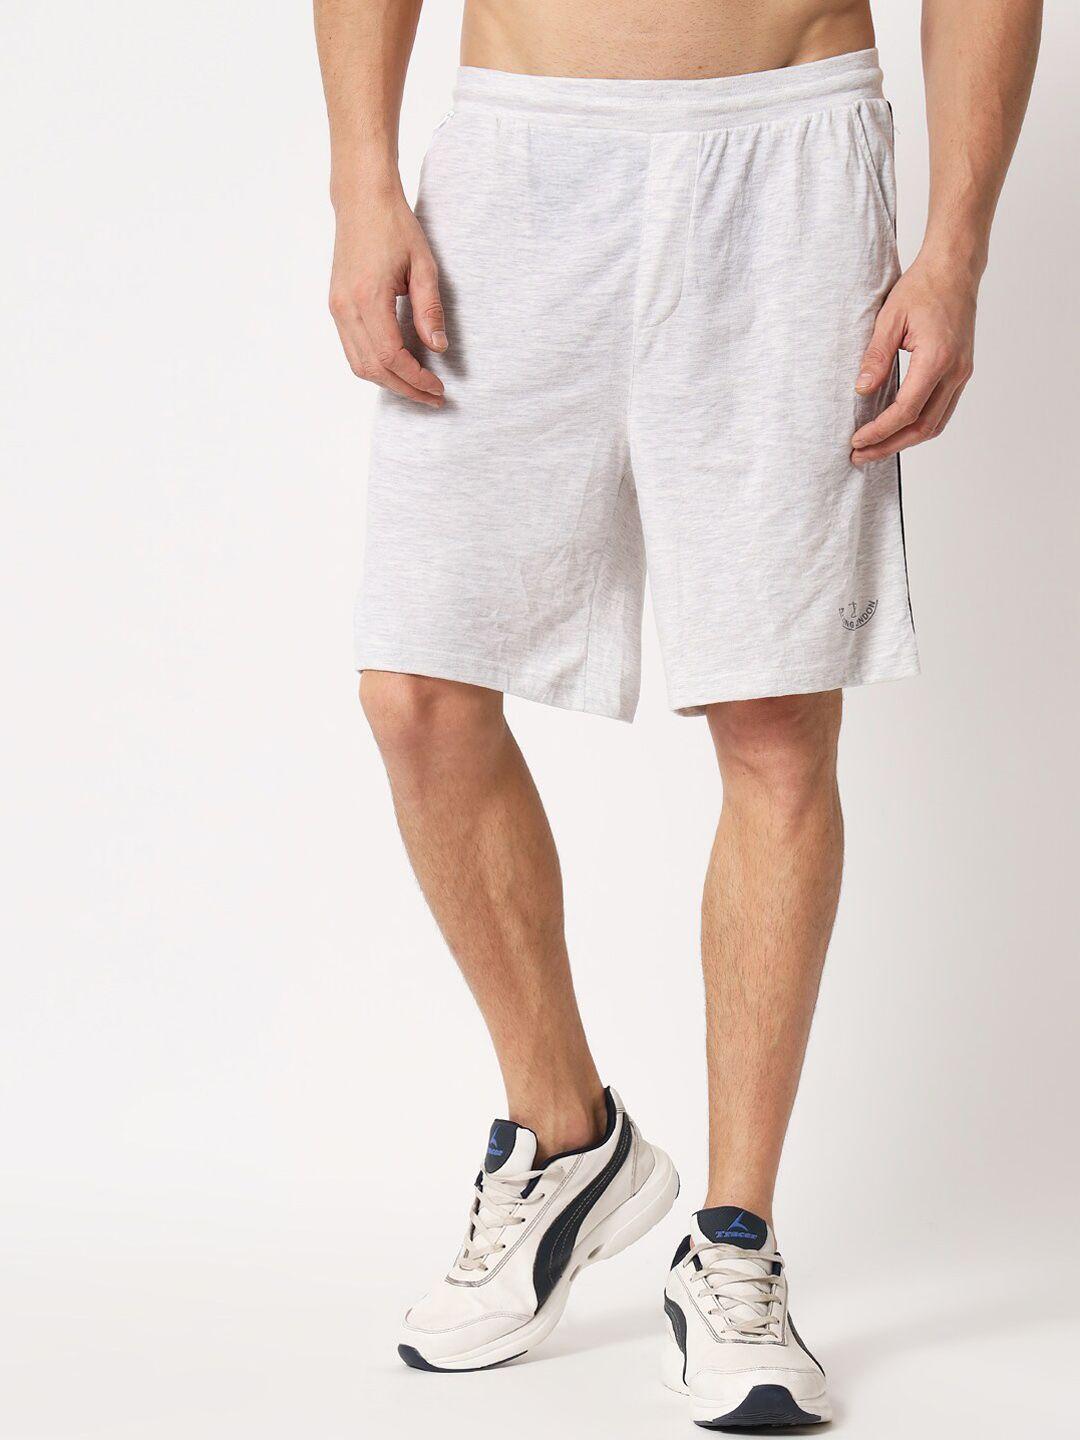 Aazing London Men White Solid Cotton Sports Shorts